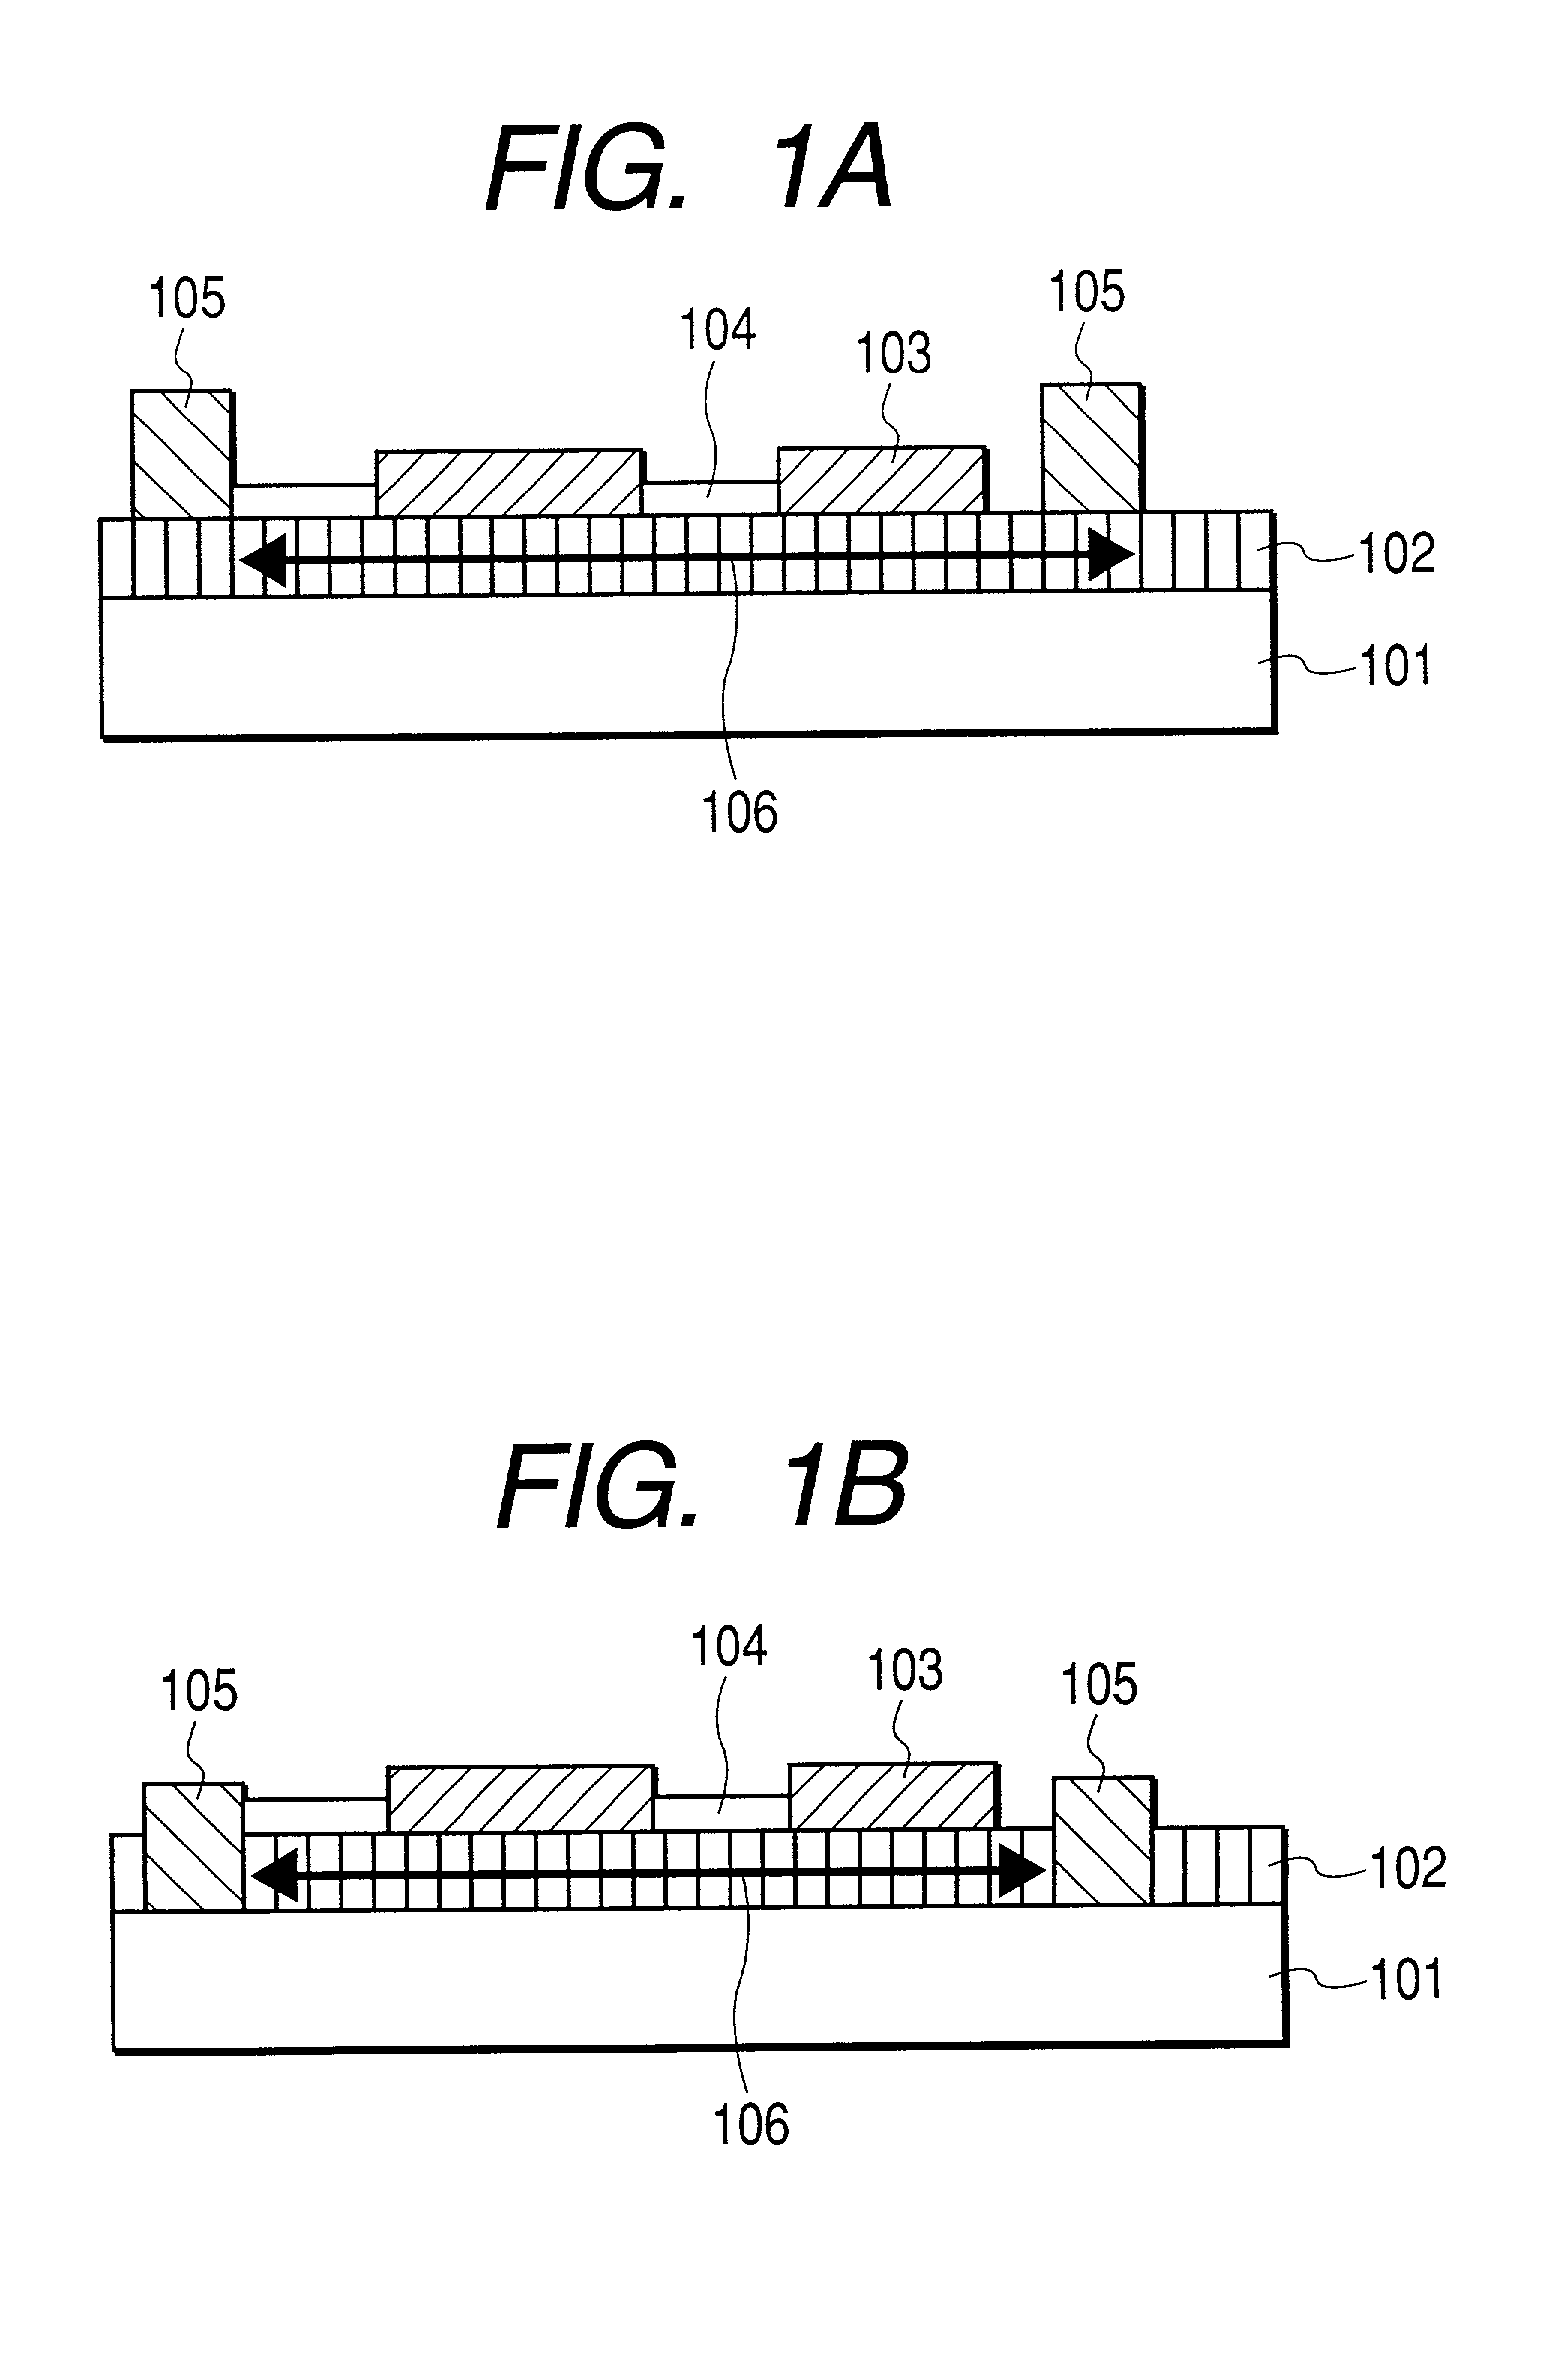 Optoelectronic substrate